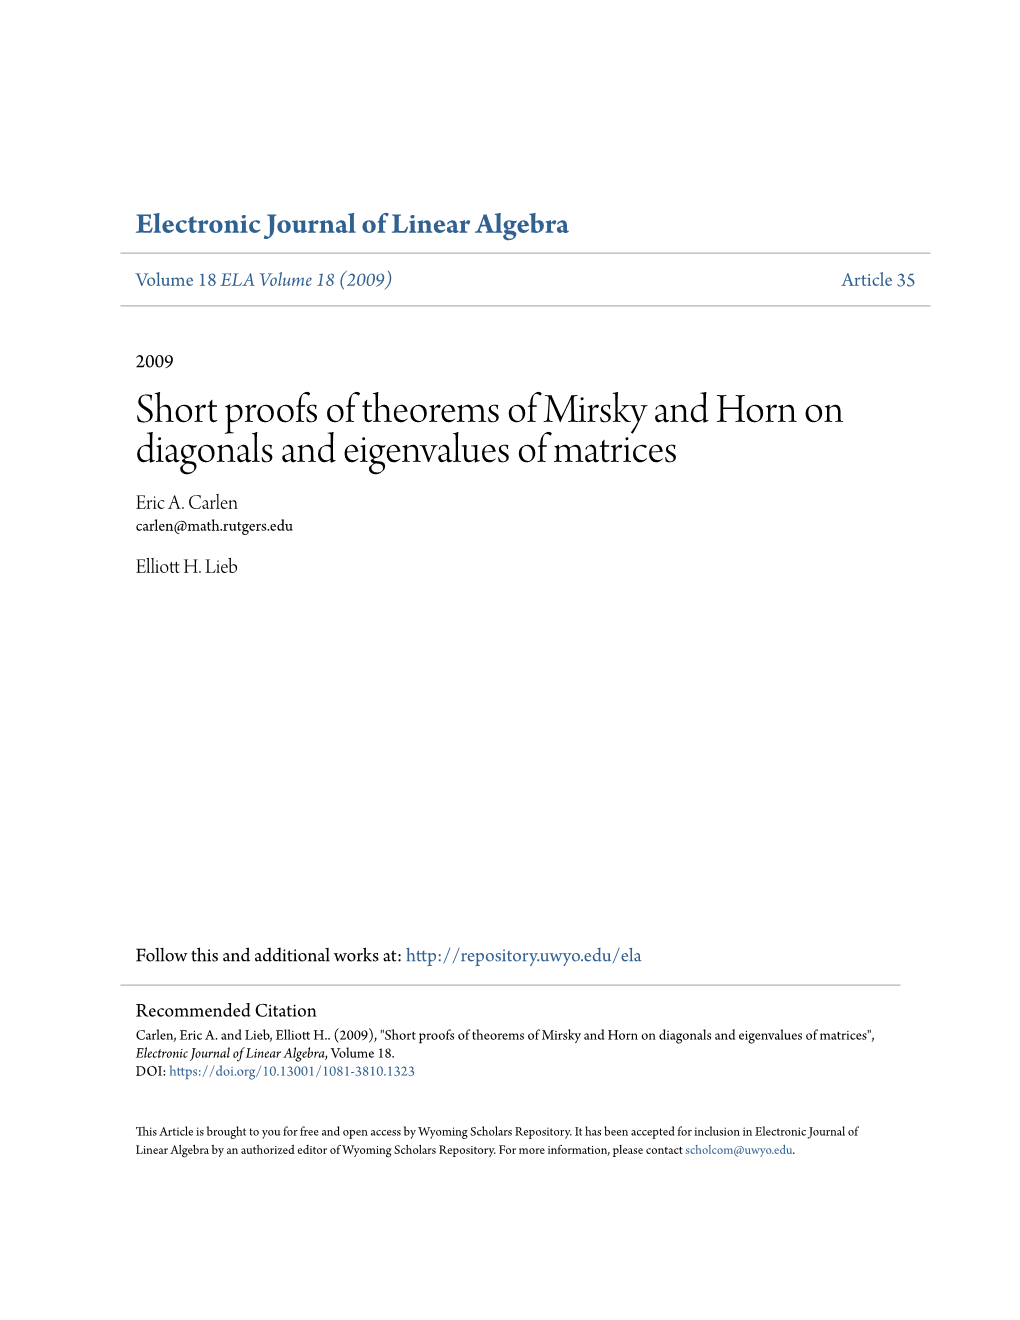 Short Proofs of Theorems of Mirsky and Horn on Diagonals and Eigenvalues of Matrices Eric A